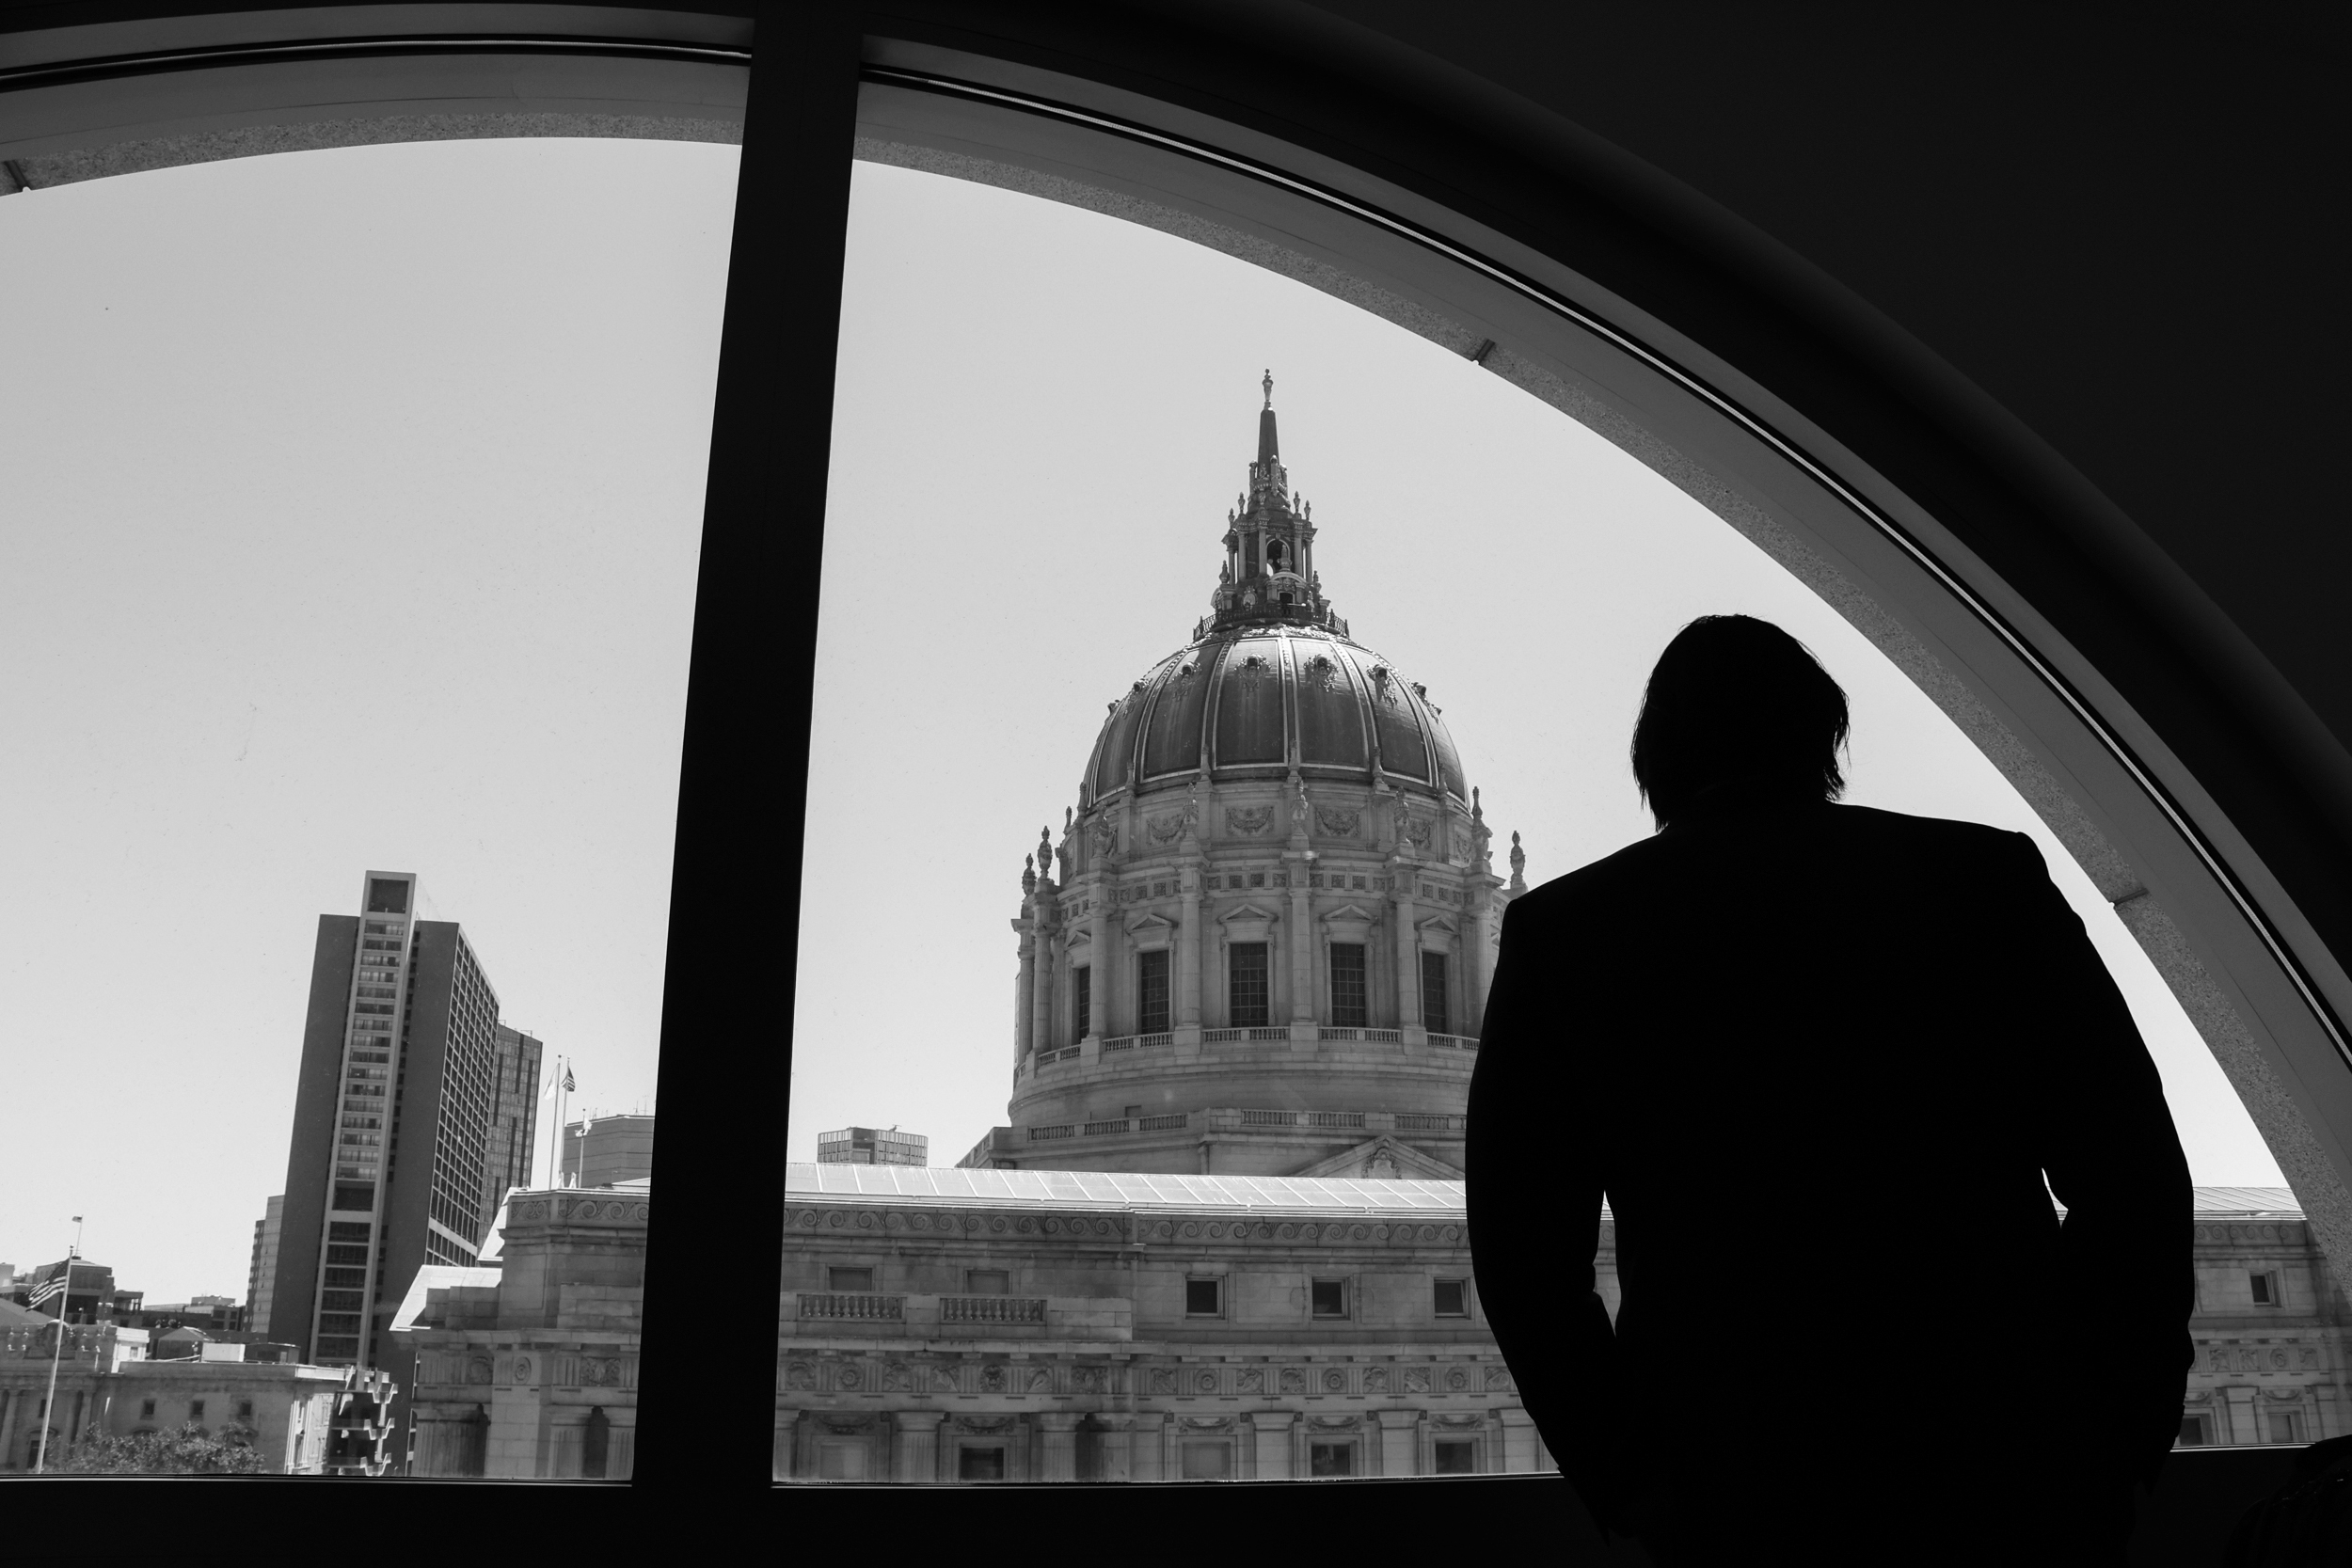 A silhouette of a man stands in front of a large window with an arched top, looking out at a domed building and surrounding cityscape in broad daylight.